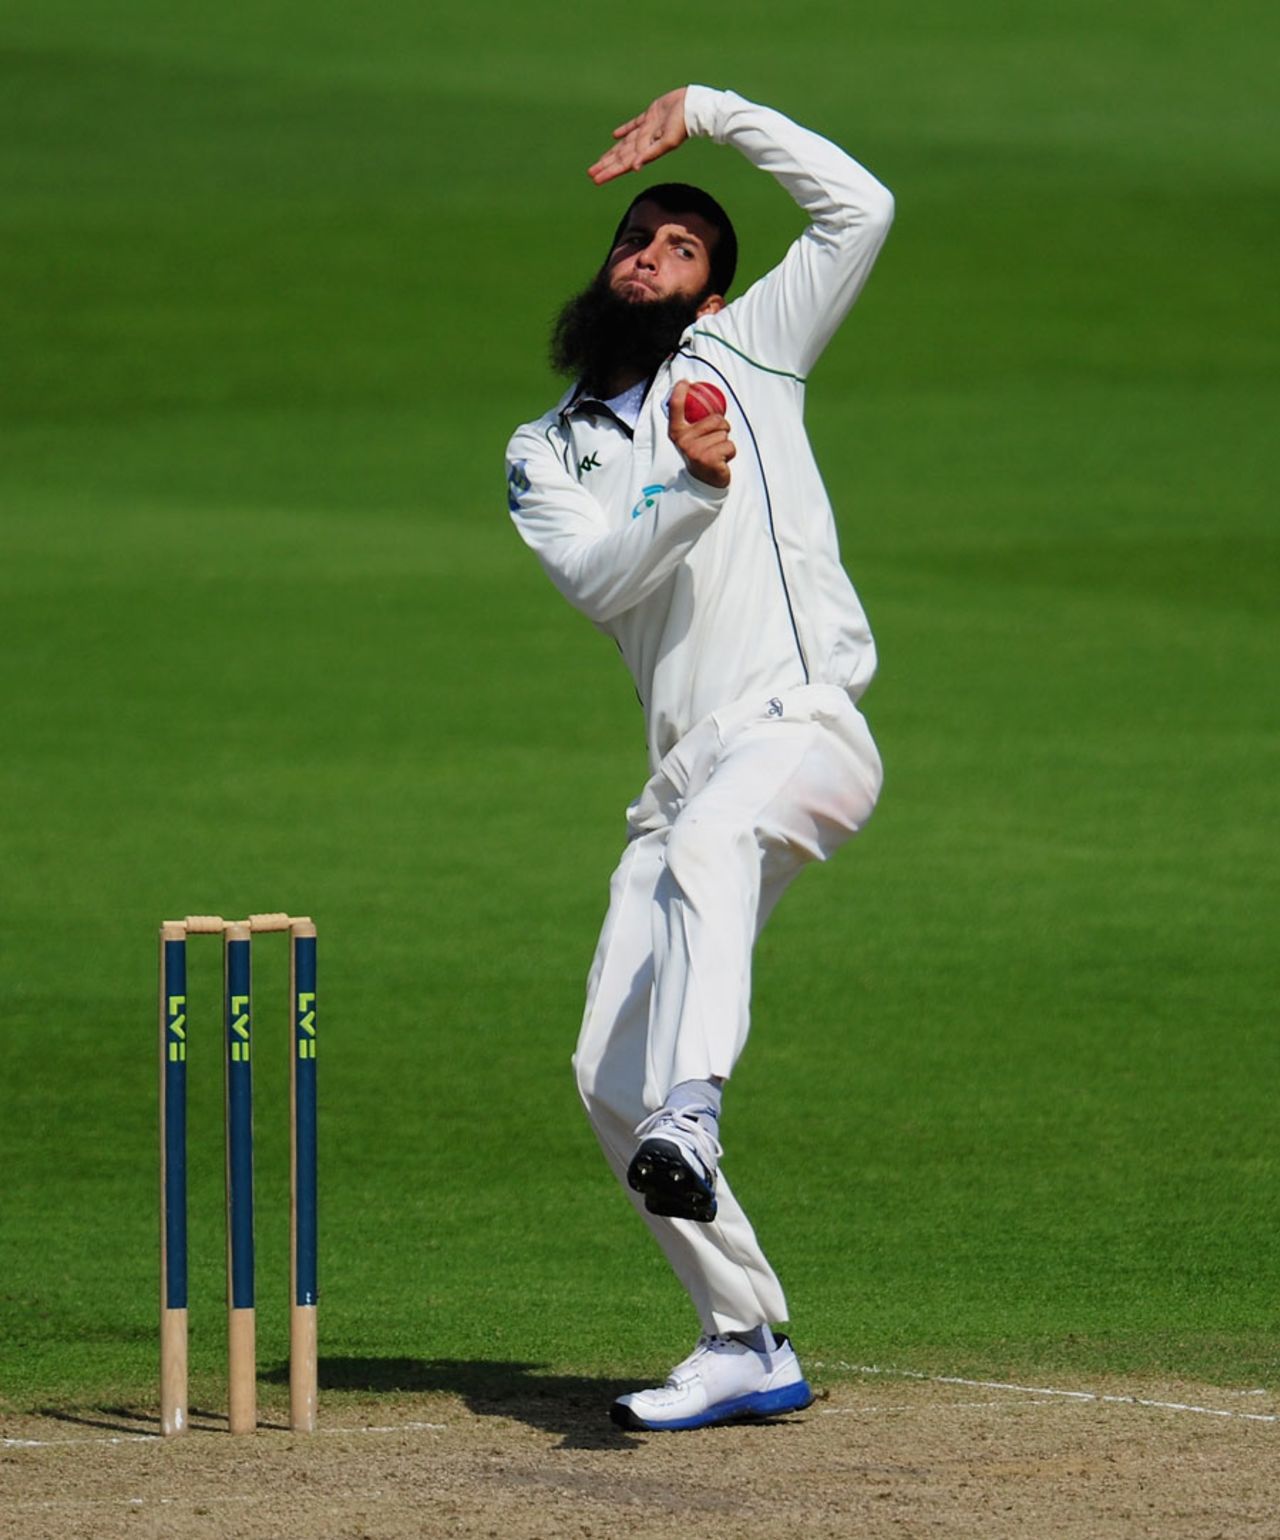 Moeen Ali picked up two wickets, Worcestershire v Warwickshire, County Championship, Division One, New Road, 2nd day, September, 4, 2012